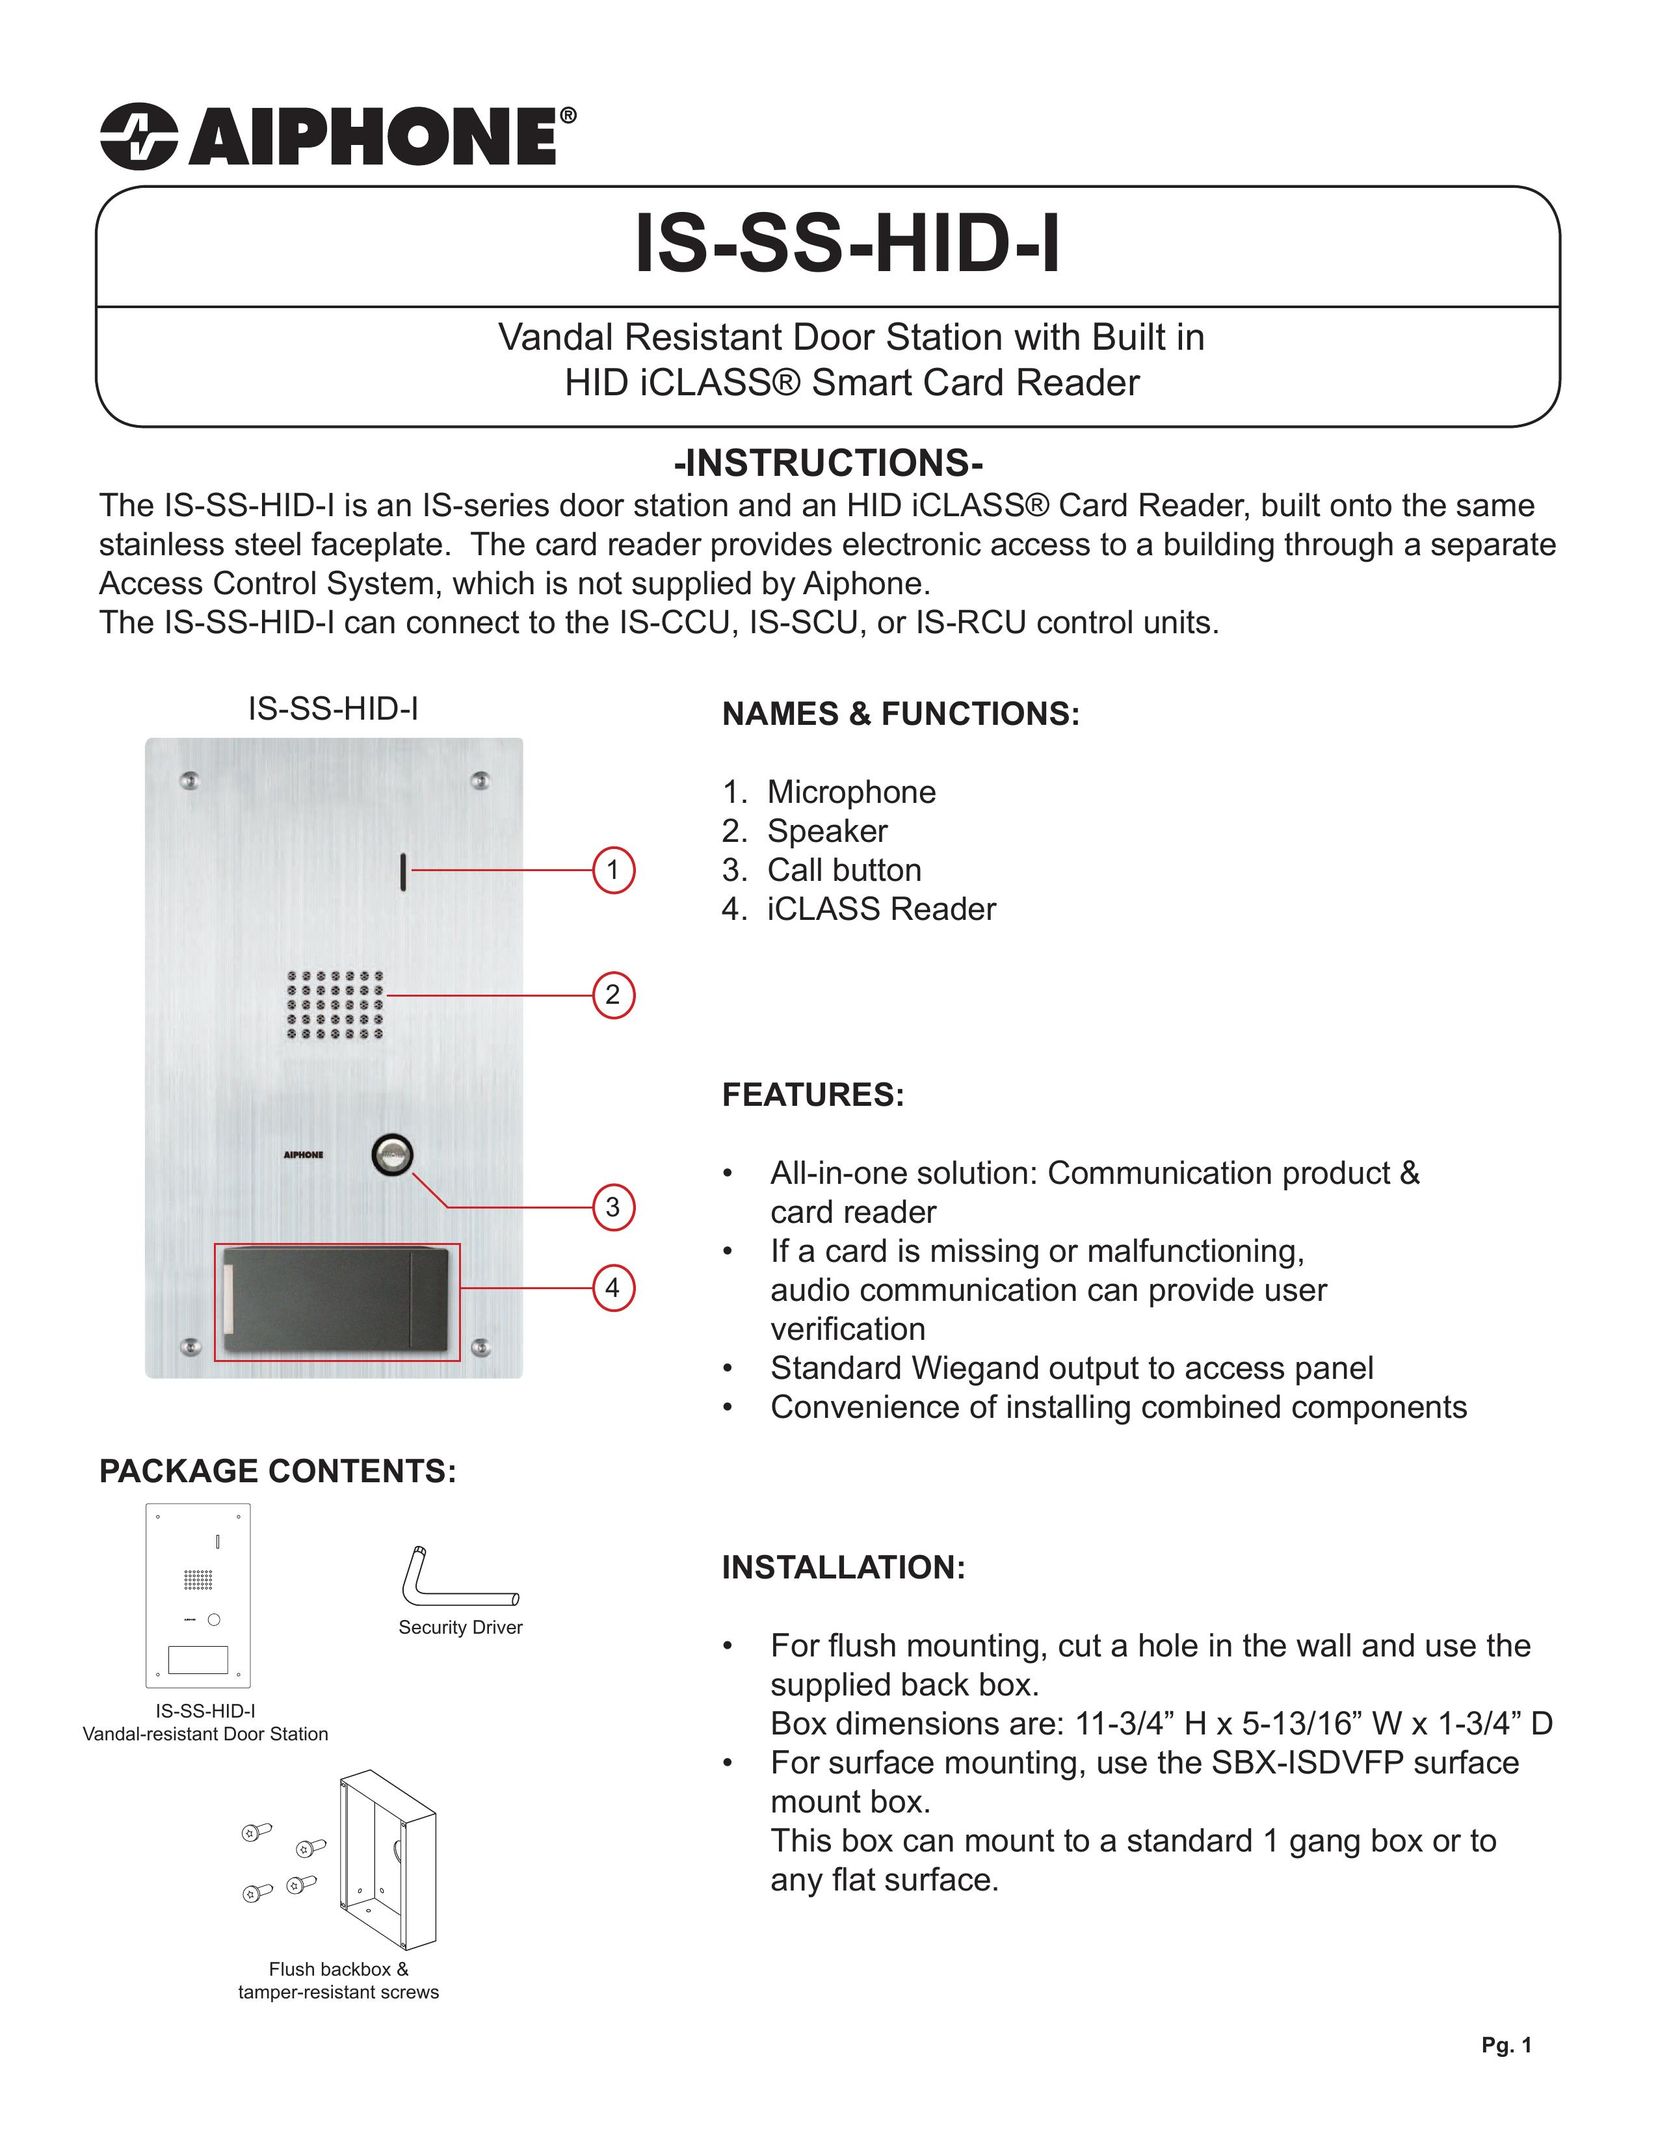 Aiphone IS-SS-HID-I Paint Sprayer User Manual